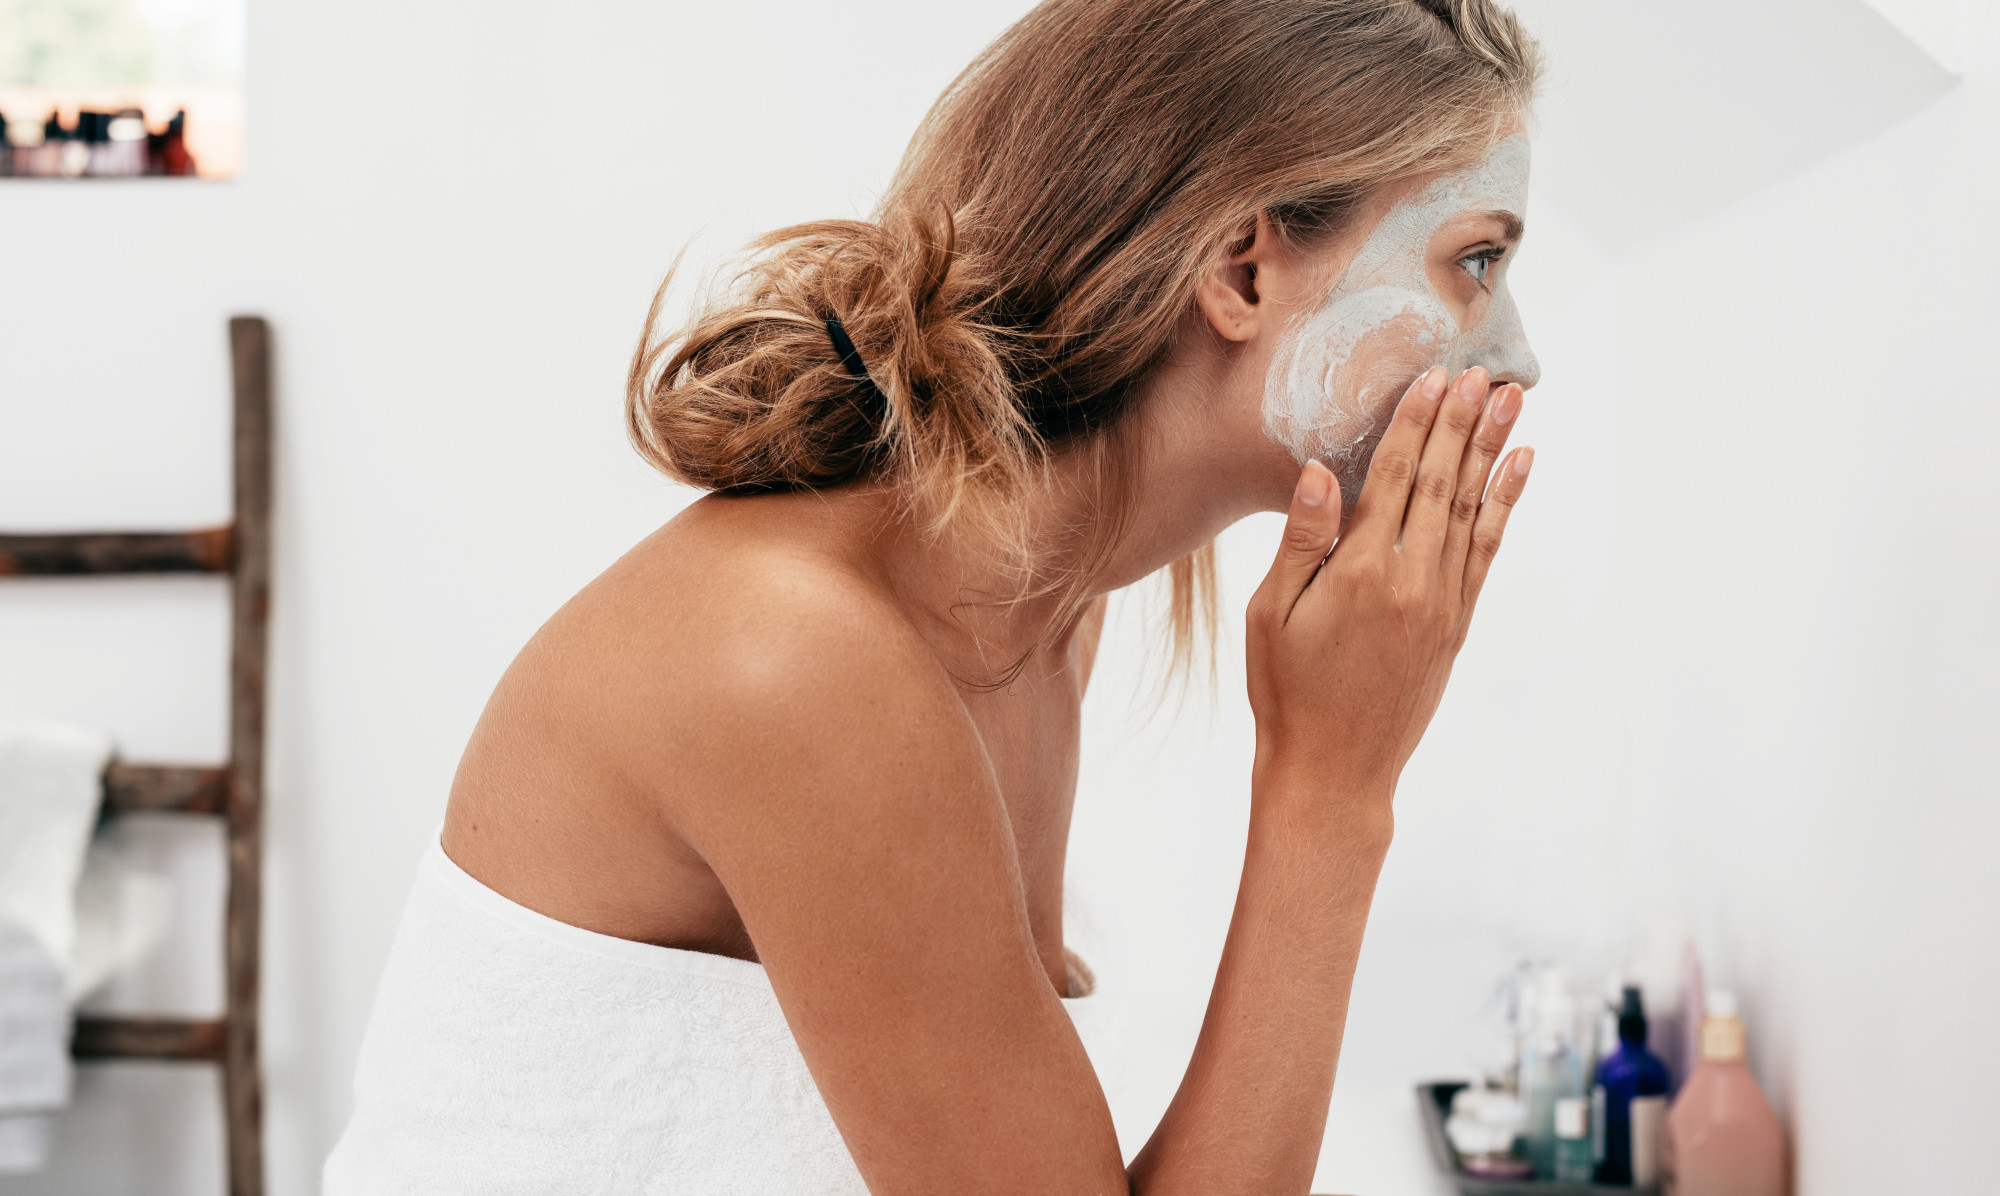 How To Build a Skin Care Routine